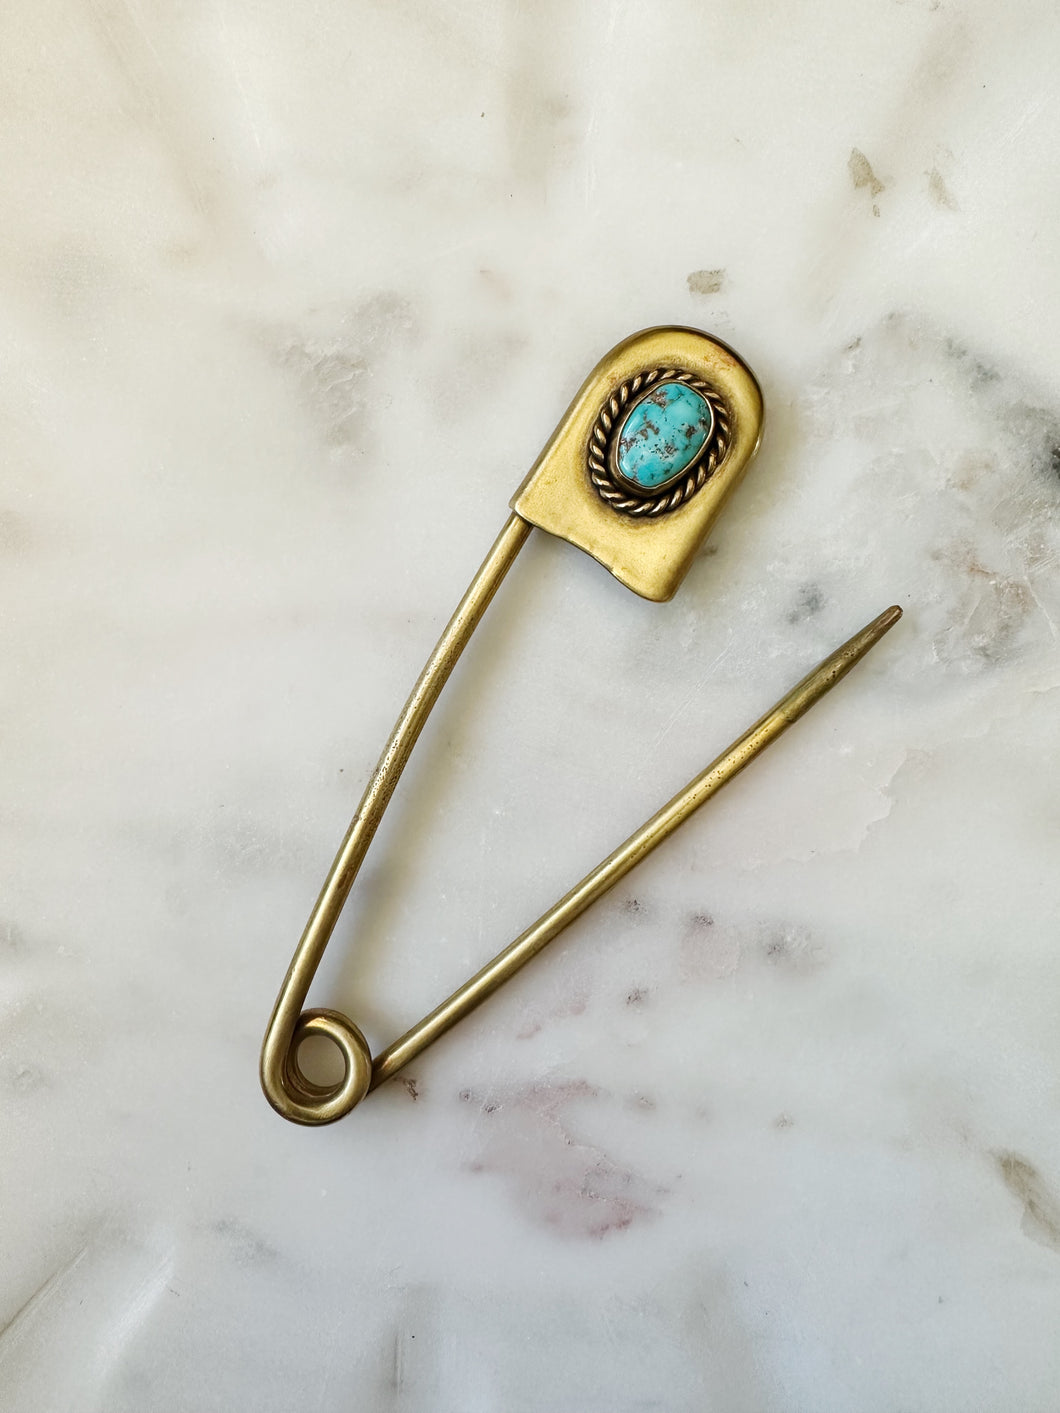 Vintage brass Laundry Pin with Old Stock Turquoise